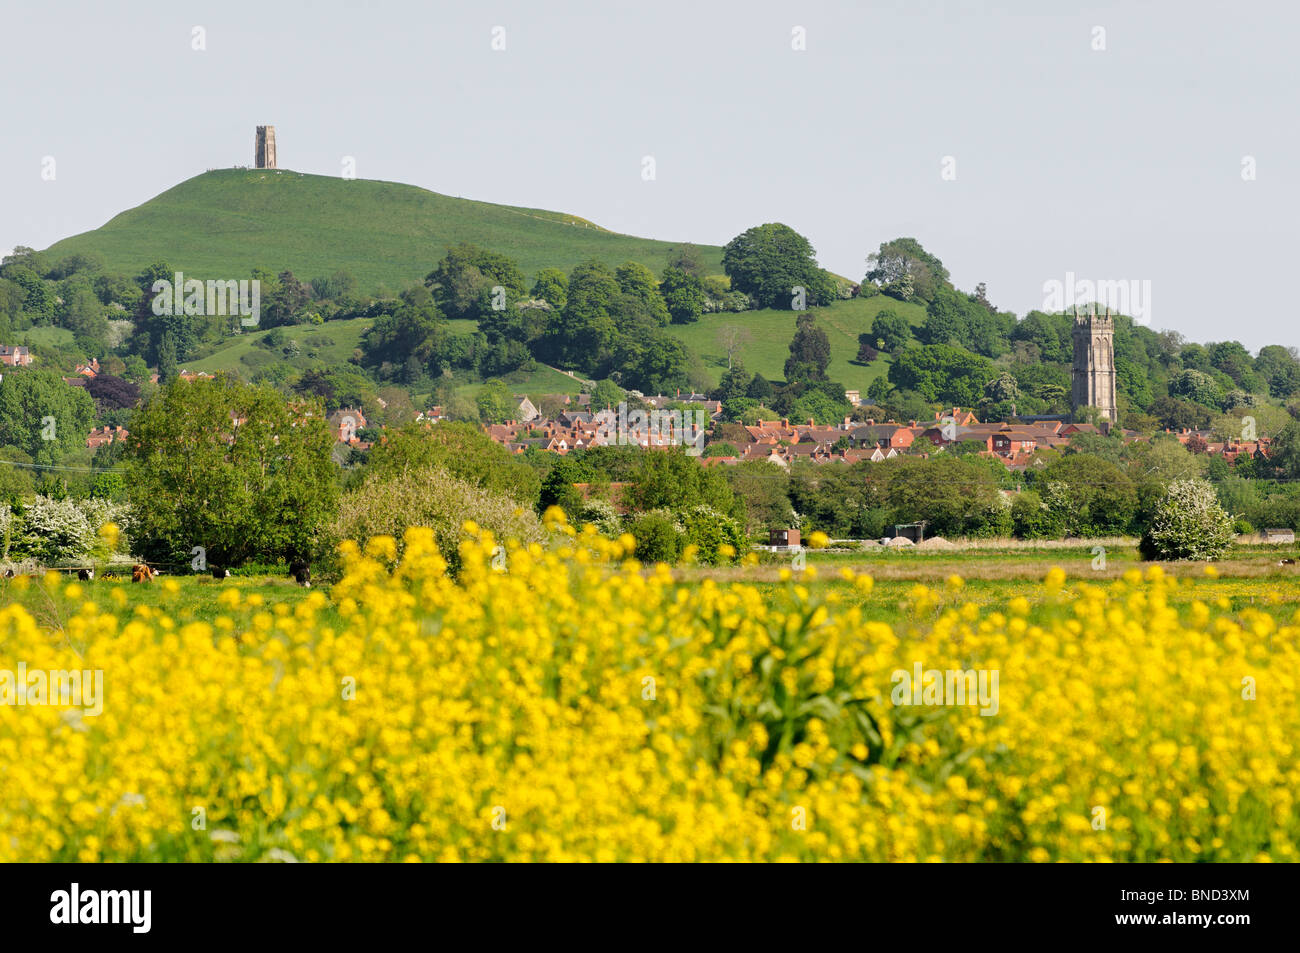 Glastonbury tor viewed from behind a field of rapeseed plants on a fine sunny early summer day Stock Photo